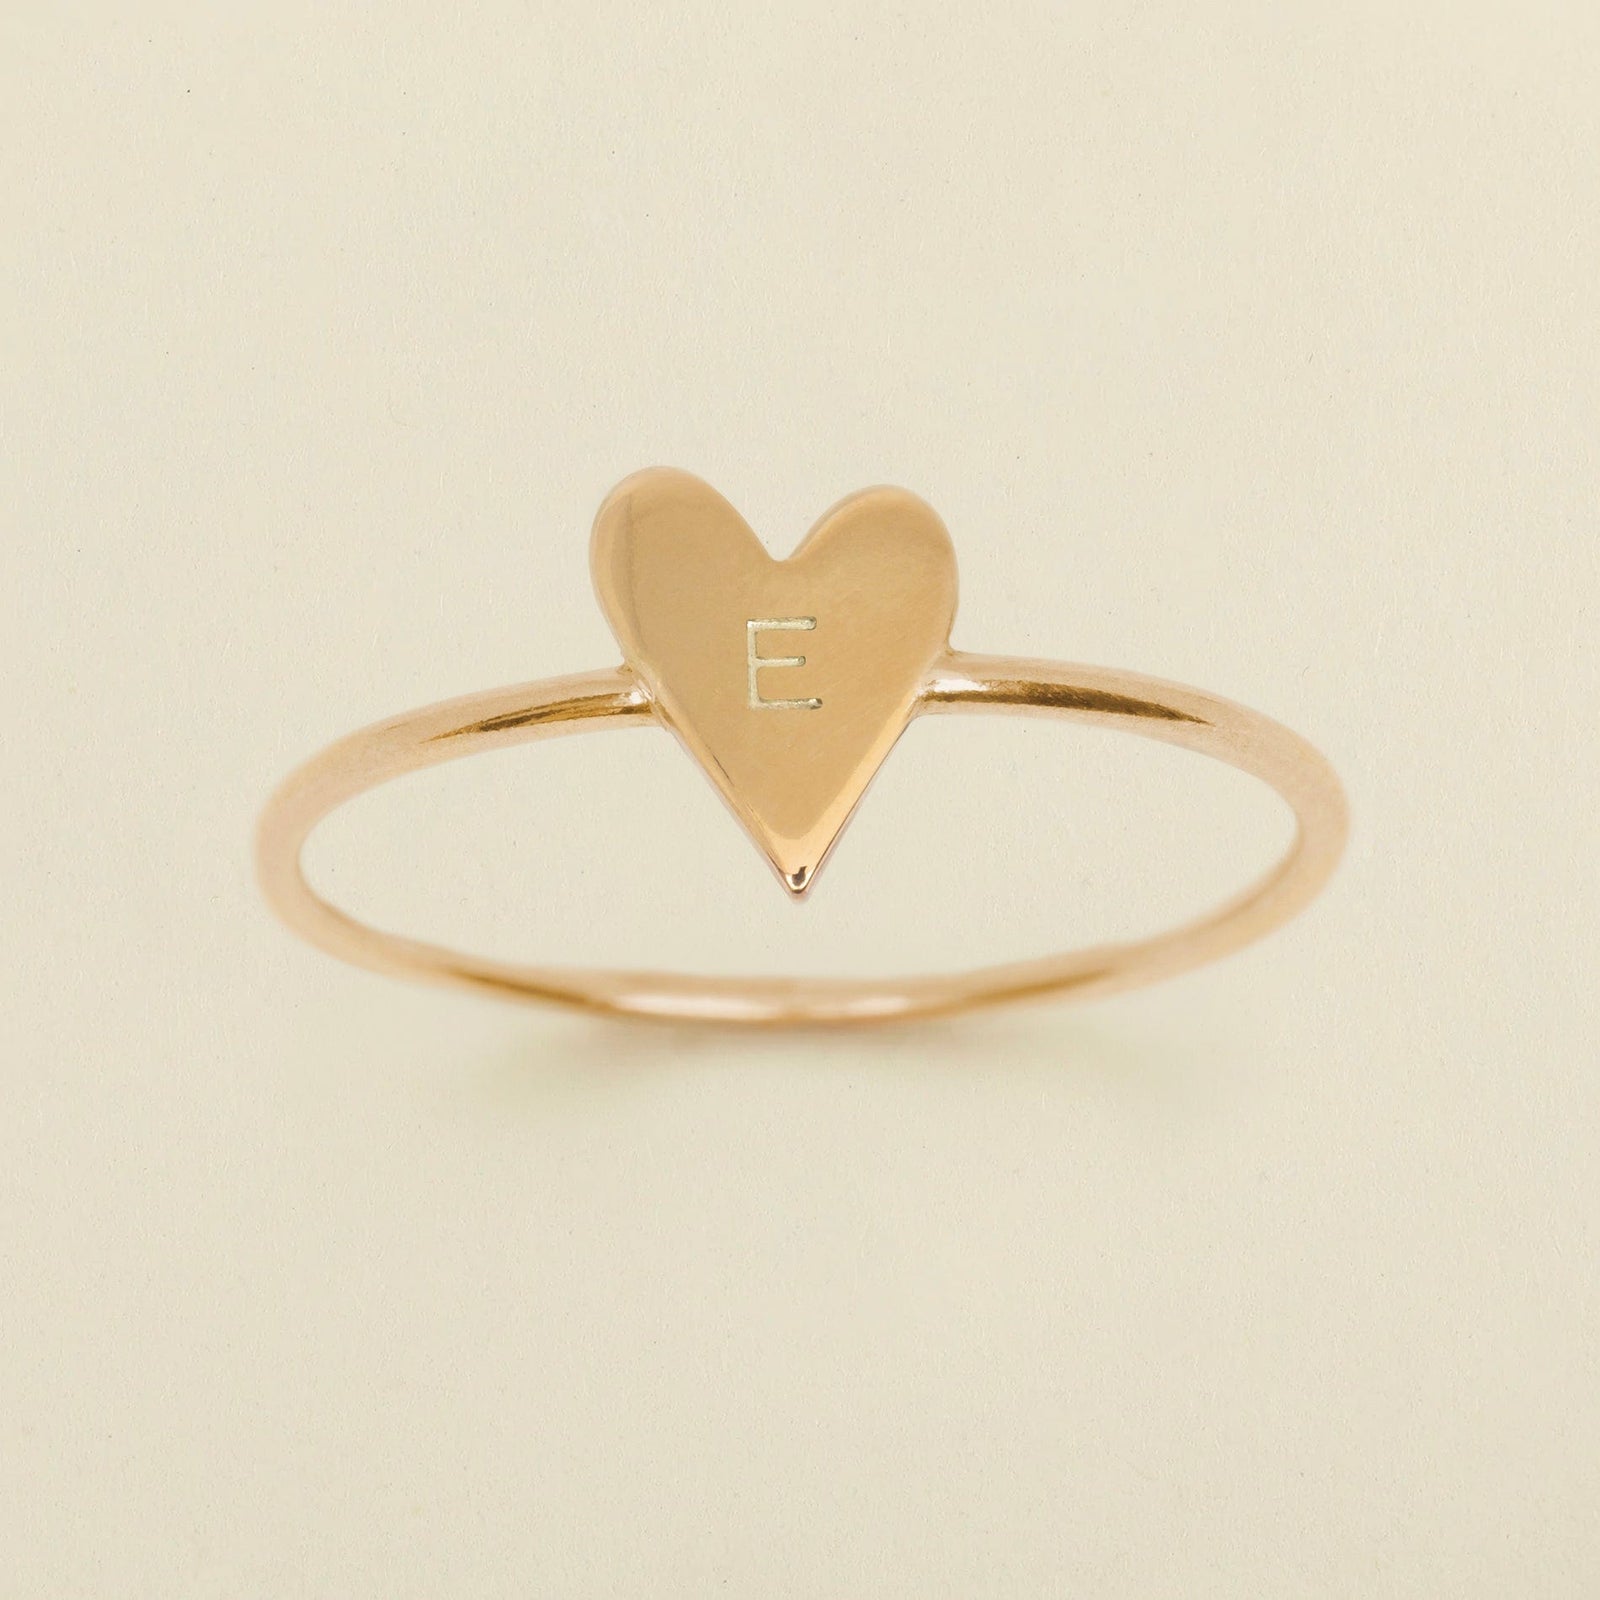 Sweetheart Ring Gold Filled / 5 Ring